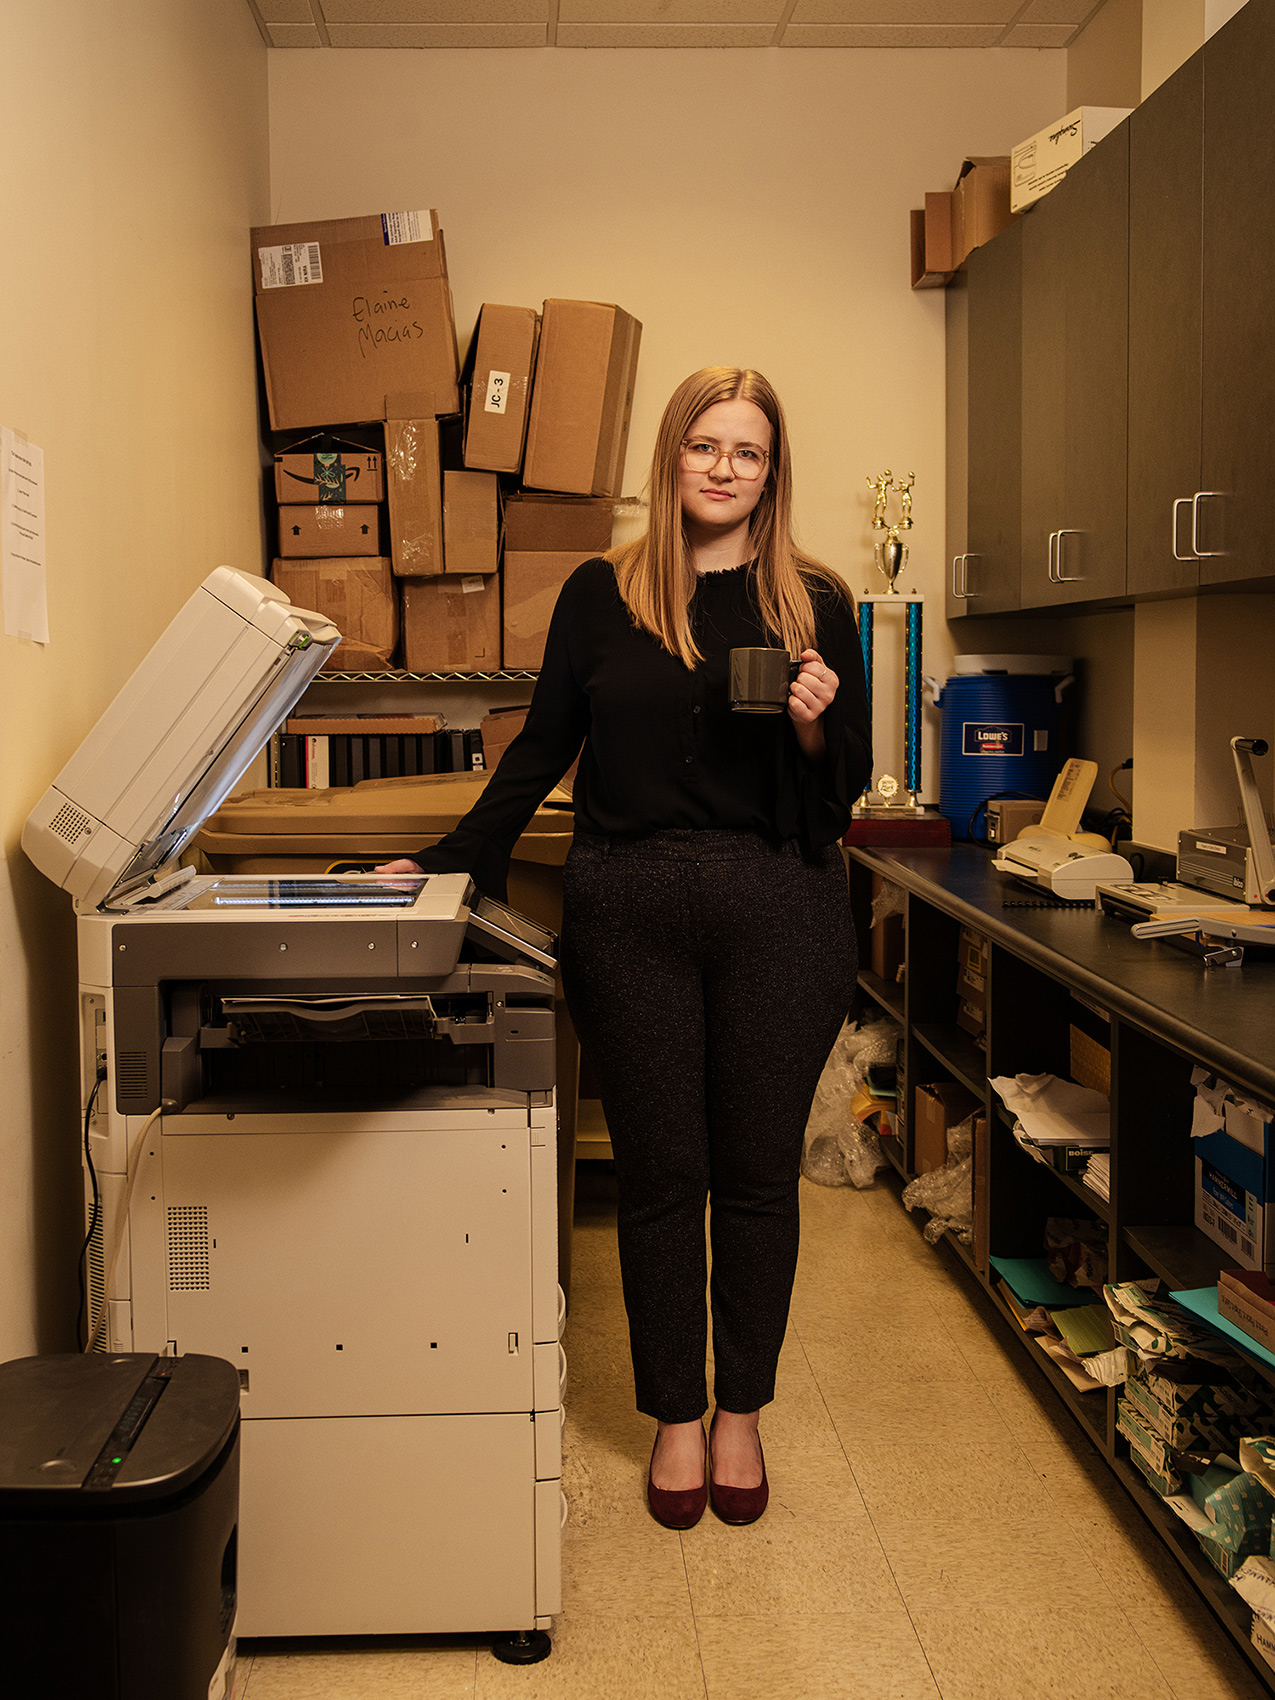 A conceptual and narrative portrait of a college graduate joining the workforce photographed by humor and portrait photographer Josh Huskin in Texas.